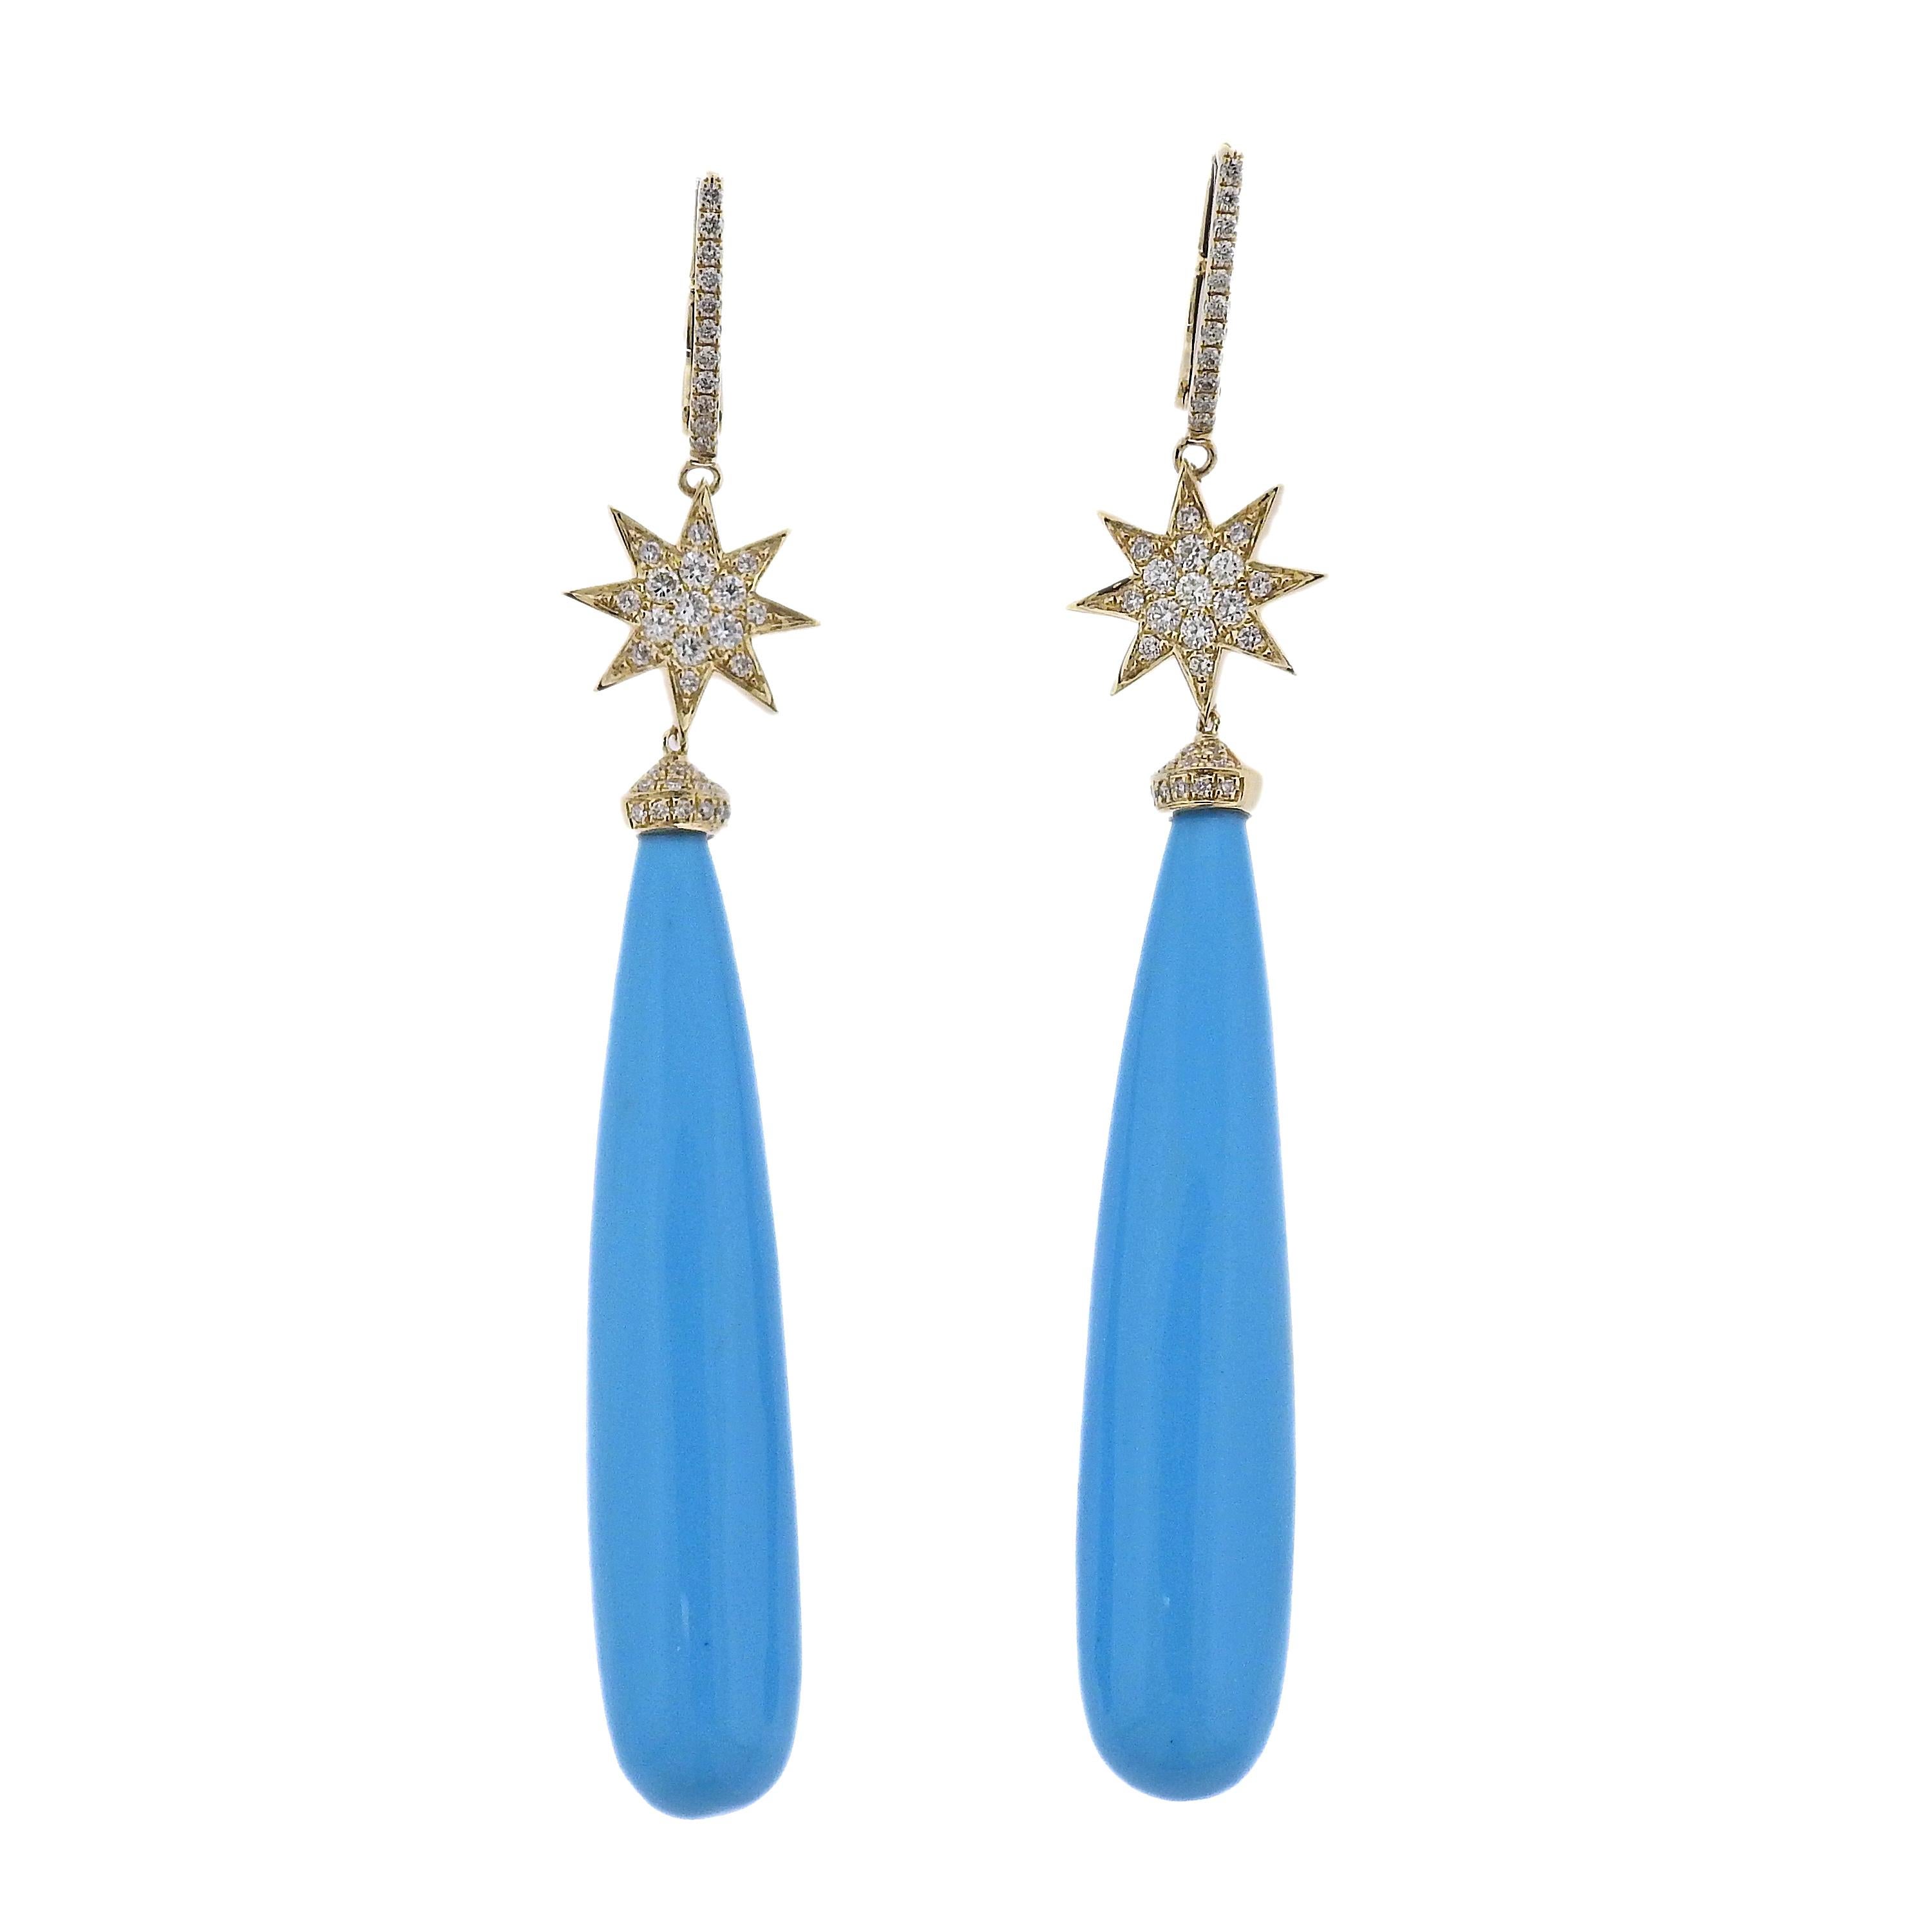 Brand new pair of 18k yellow gold drop earrings by Doves Doron Paloma , with turquoise and 0.55ctw H/VS diamonds.  Earrings are 75mm long. Weight - 11.3 grams. Marked: 18k,  Dove hallmark. 